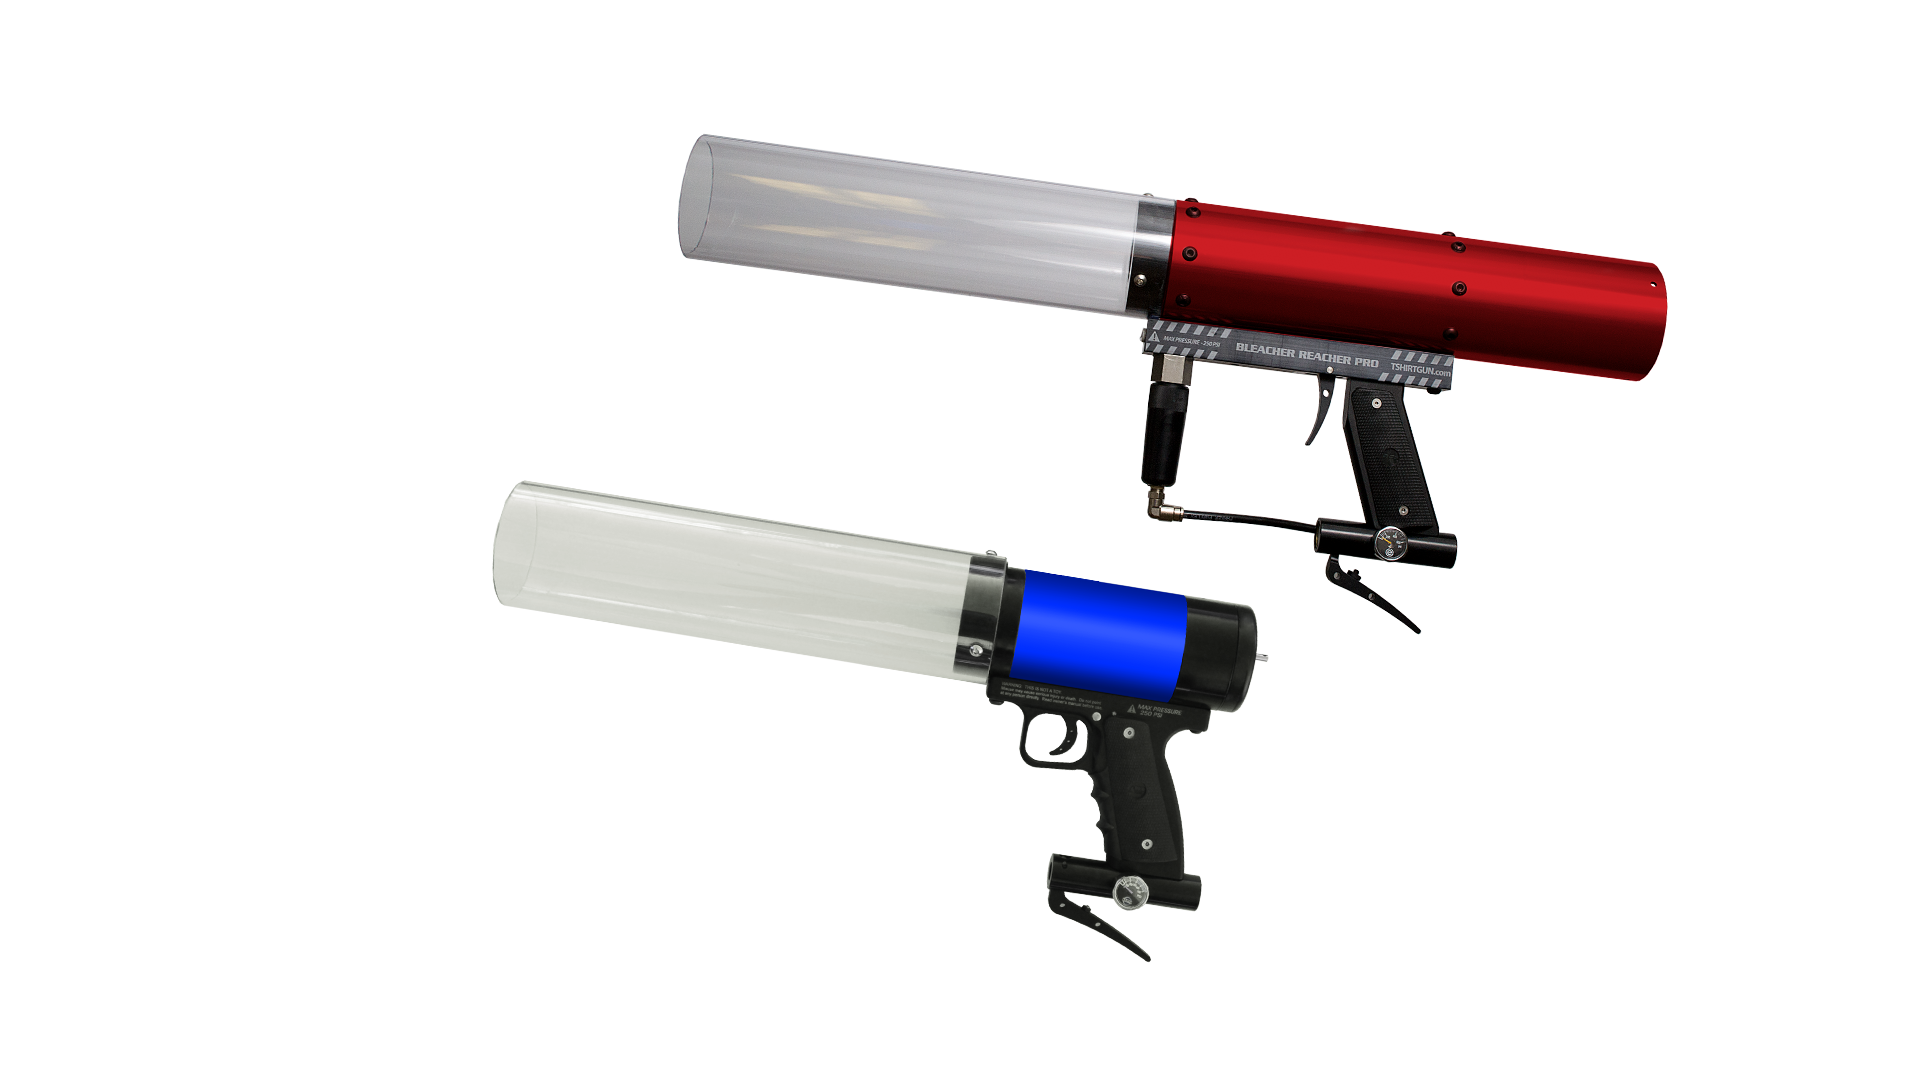 t shirt cannon png